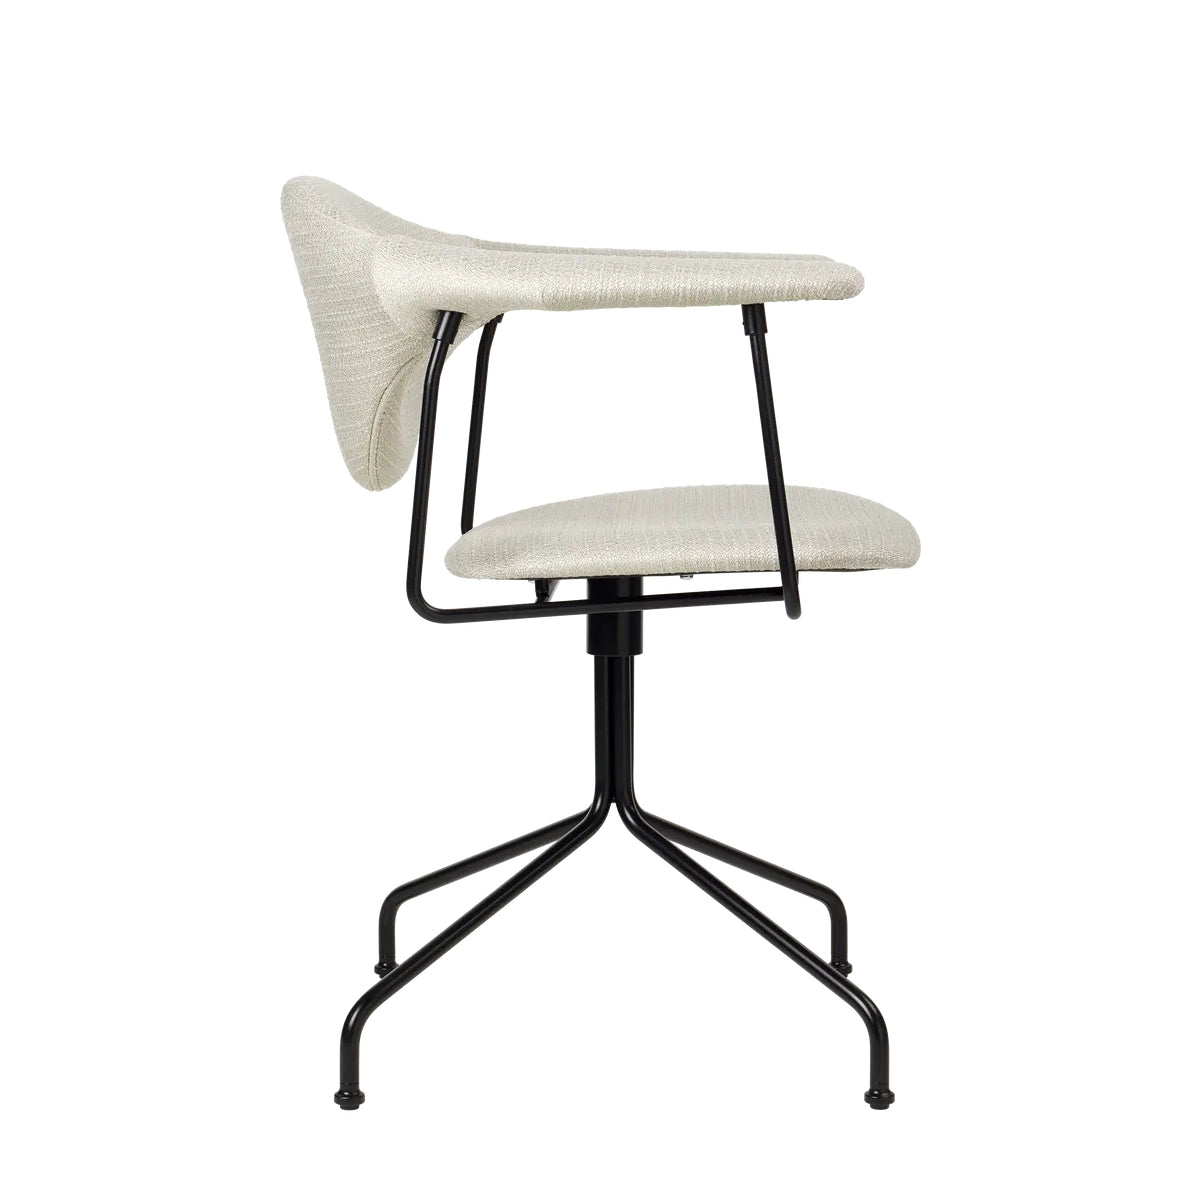 GUBI | Masculo Meeting Chair – Fully Upholstered